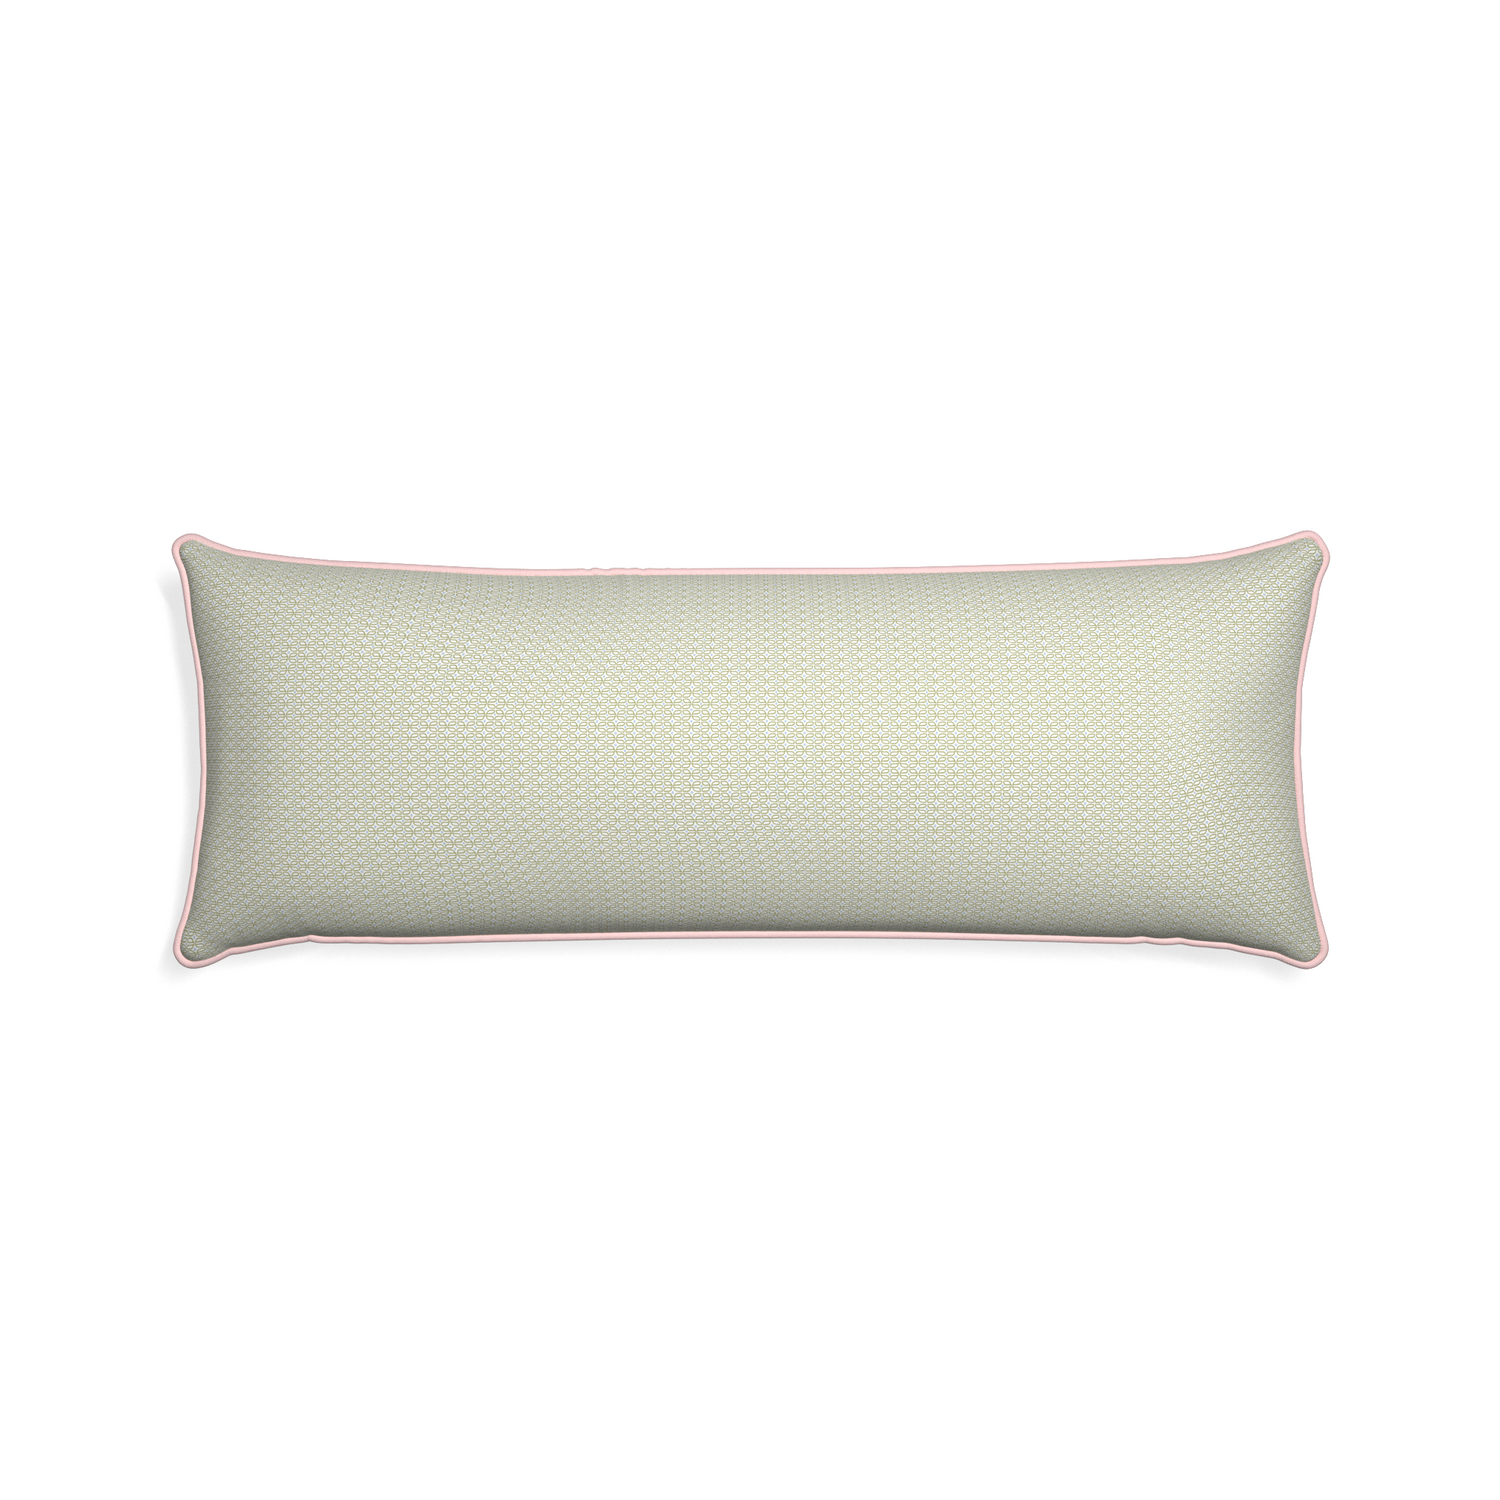 Xl-lumbar loomi moss custom pillow with petal piping on white background